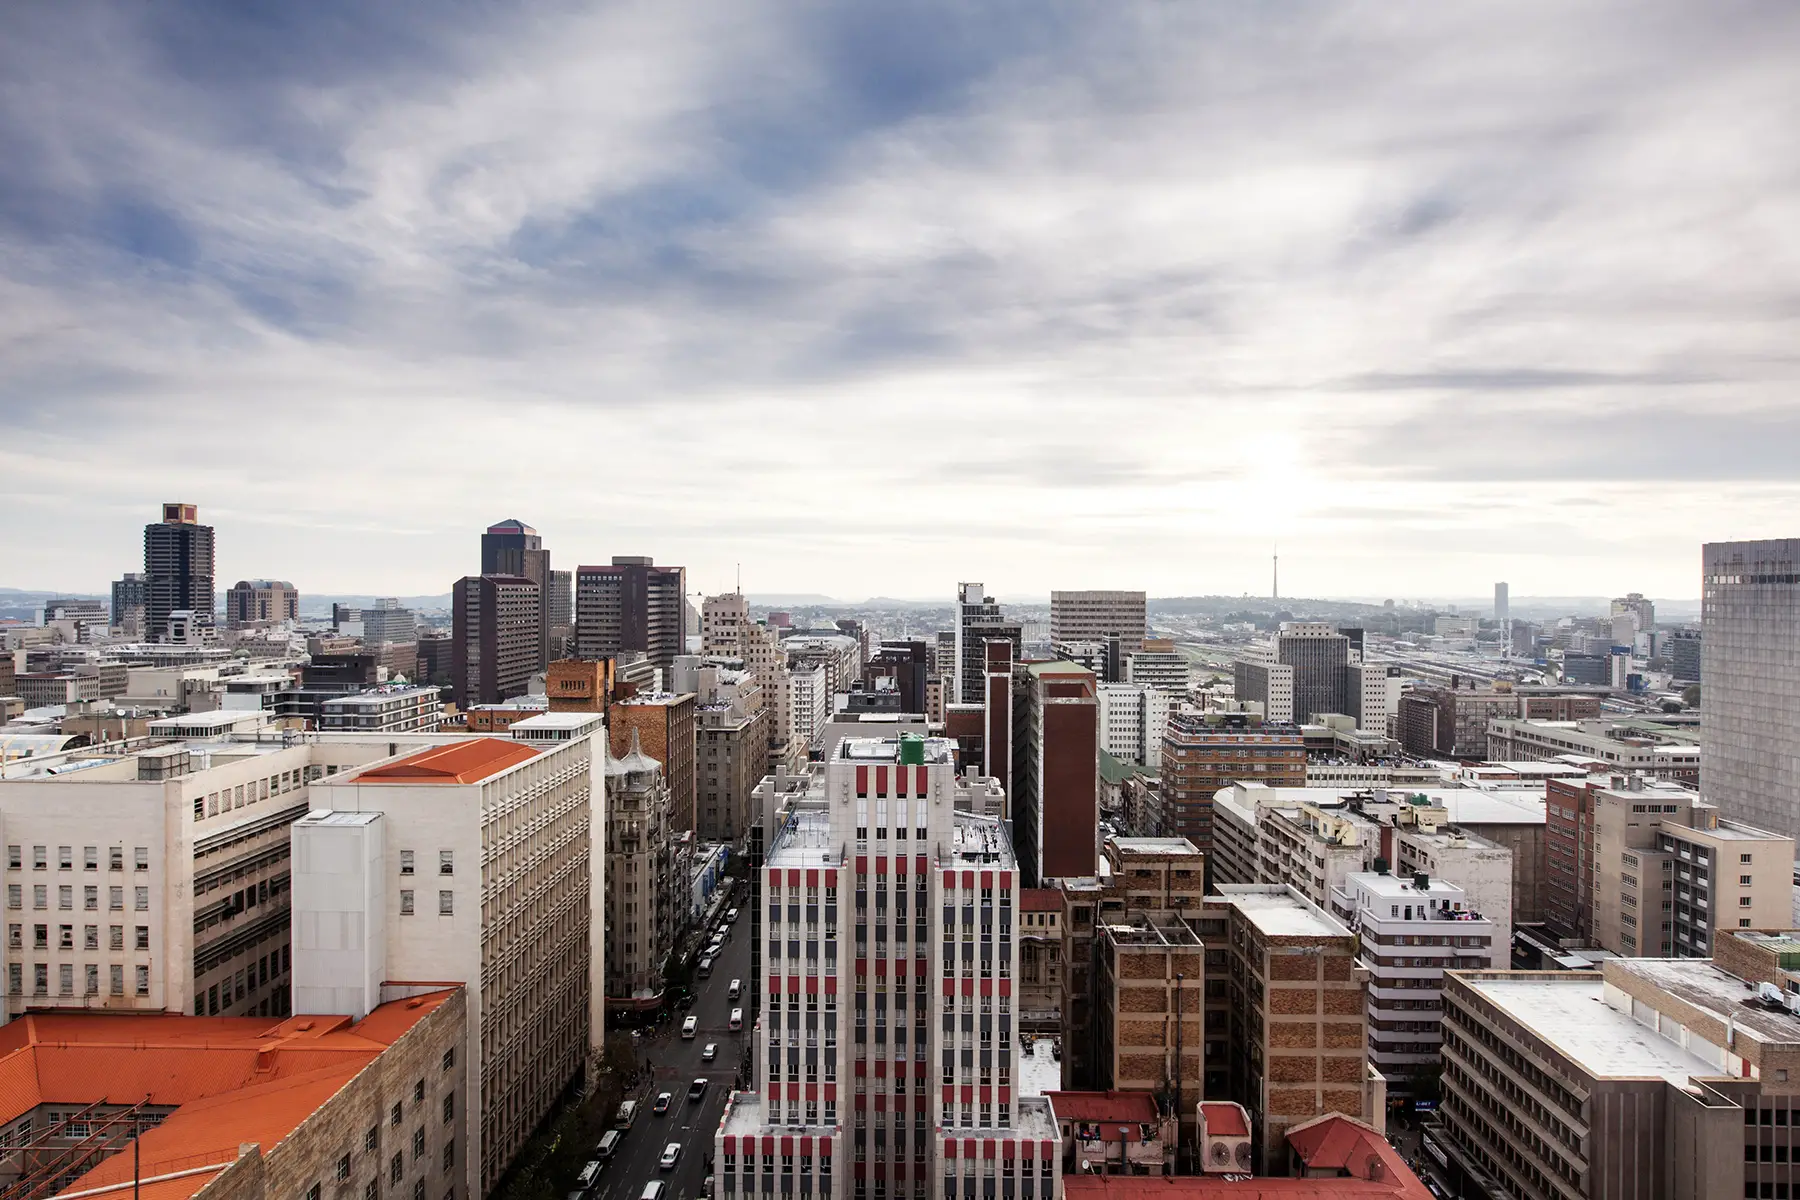 Office buildings in the city center of Johannesburg, South Africa